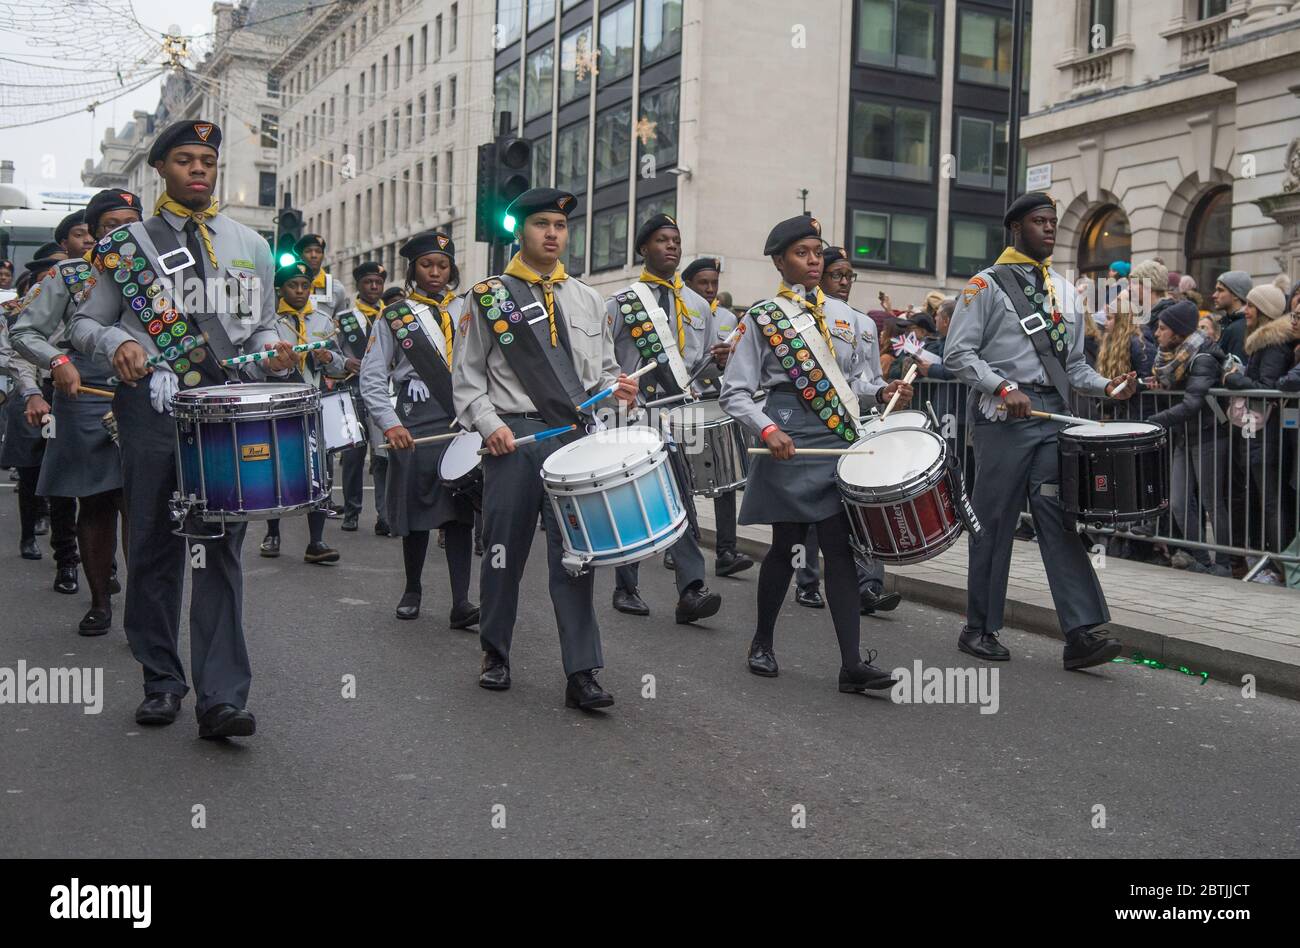 London New Year's Day Parade 2020, High School Marching Band of Drummers. Banque D'Images